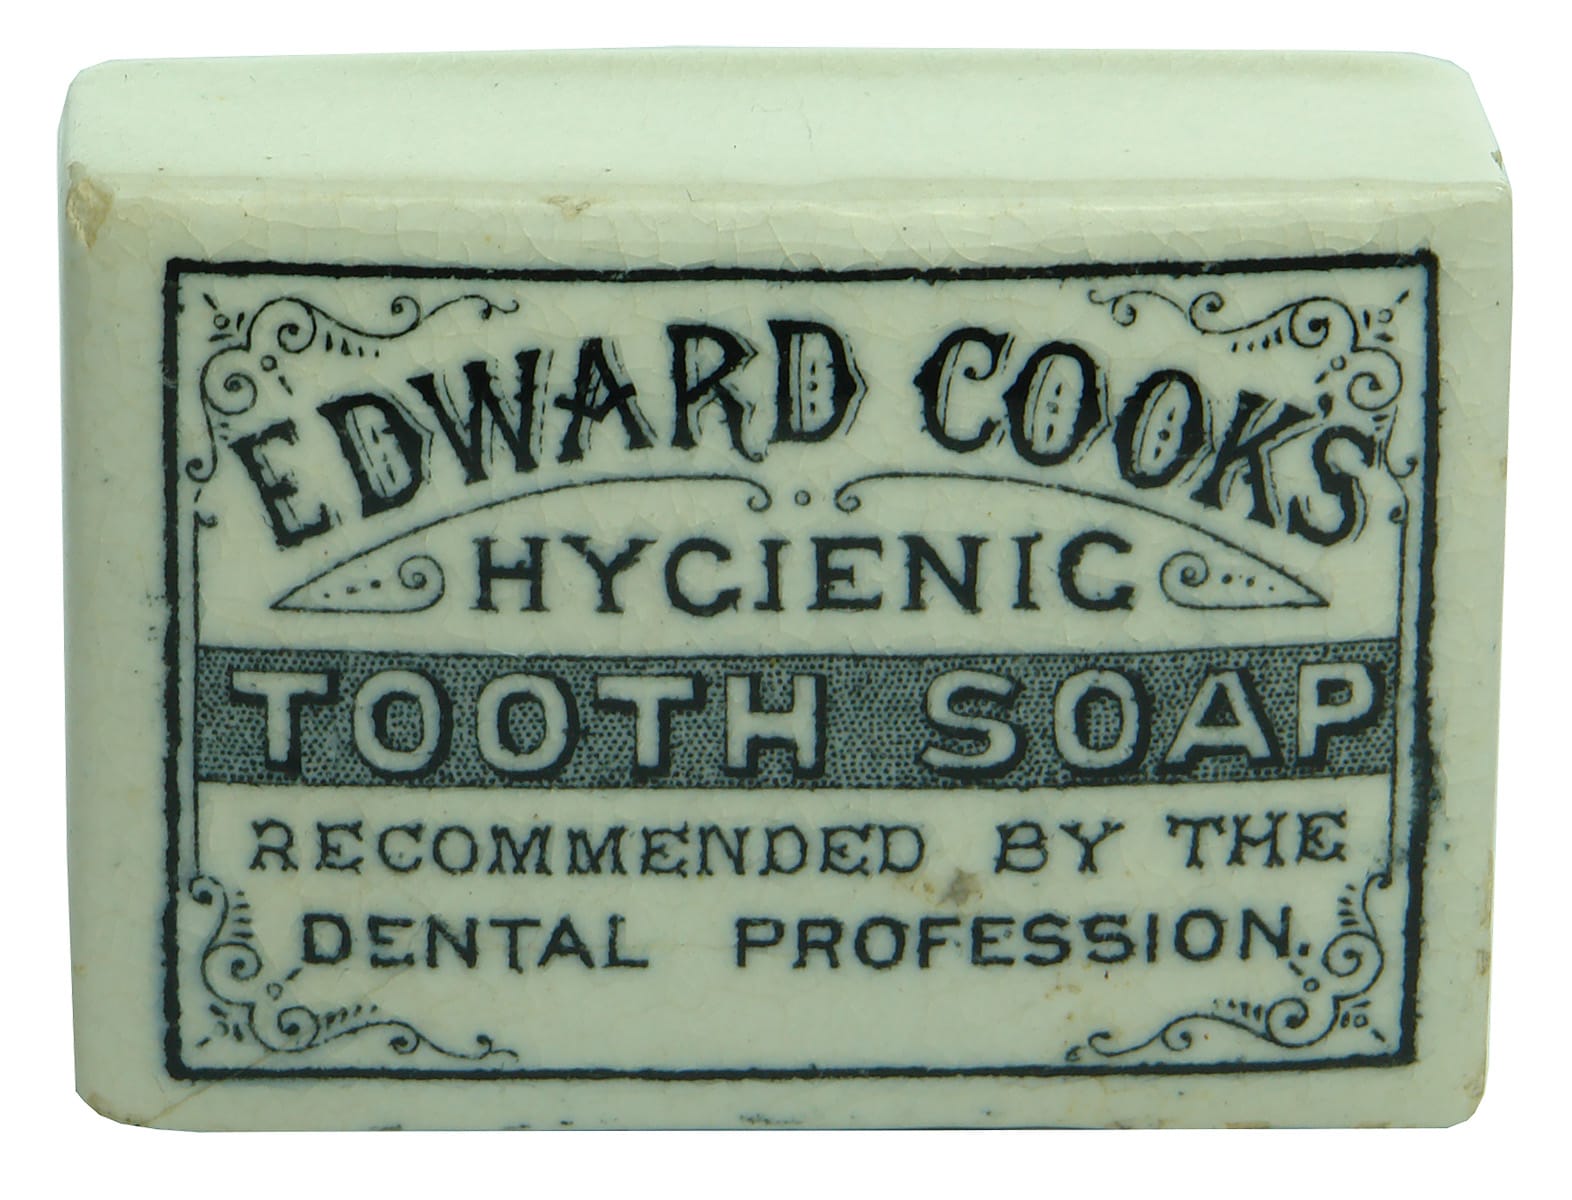 Edward Cook's Hygienic Tooth Paste Pot Lid